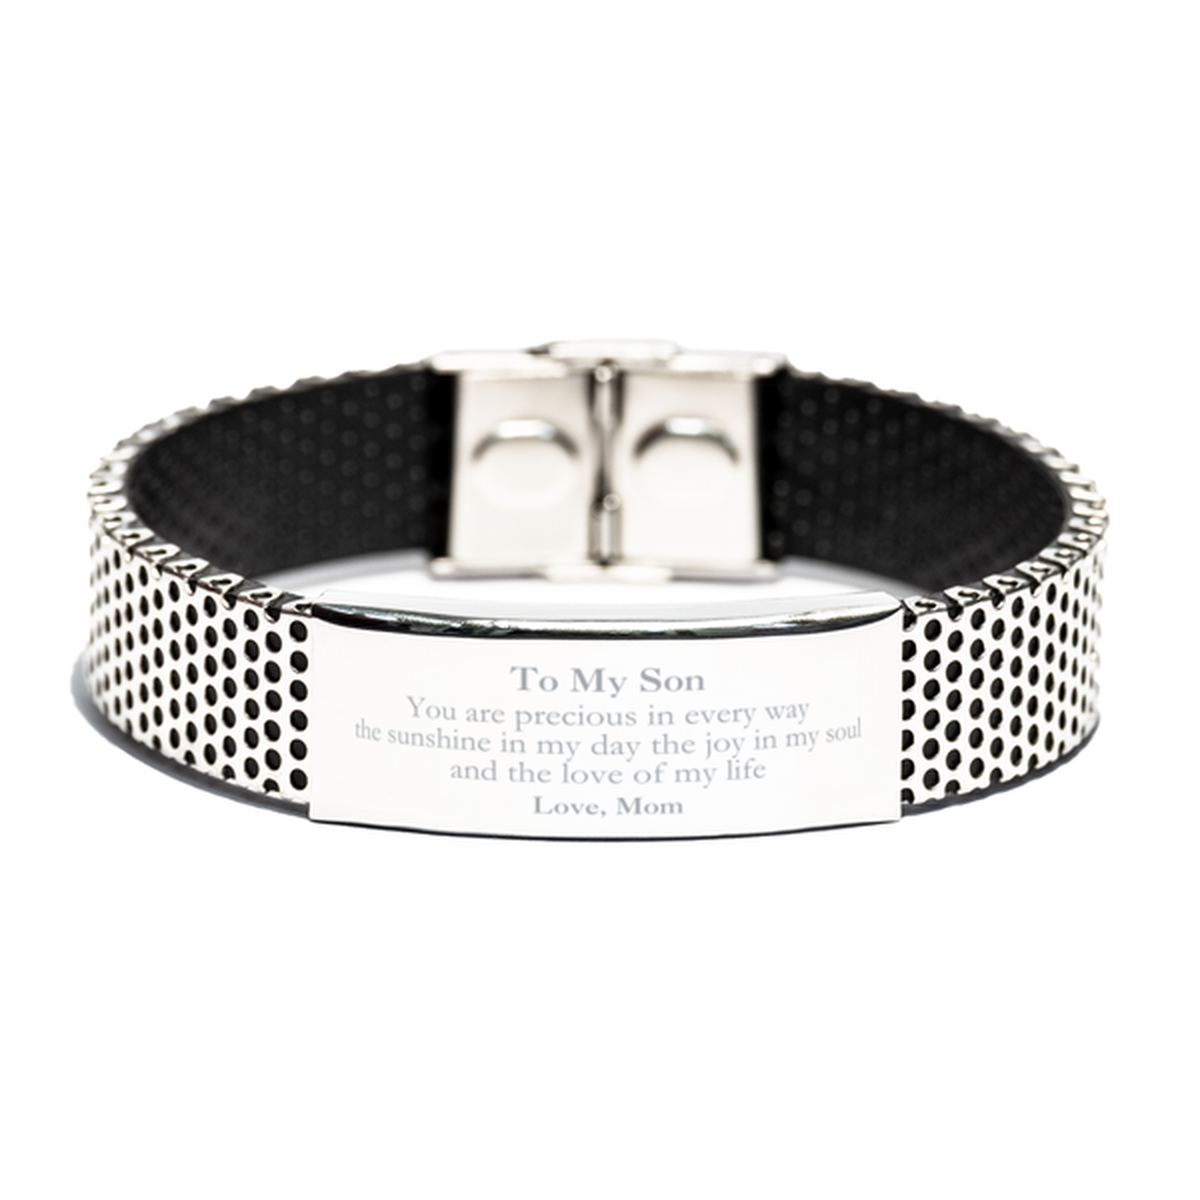 Graduation Gifts for Son Stainless Steel Bracelet Present from Mom, Christmas Son Birthday Gifts Son You are precious in every way the sunshine in my day. Love, Mom